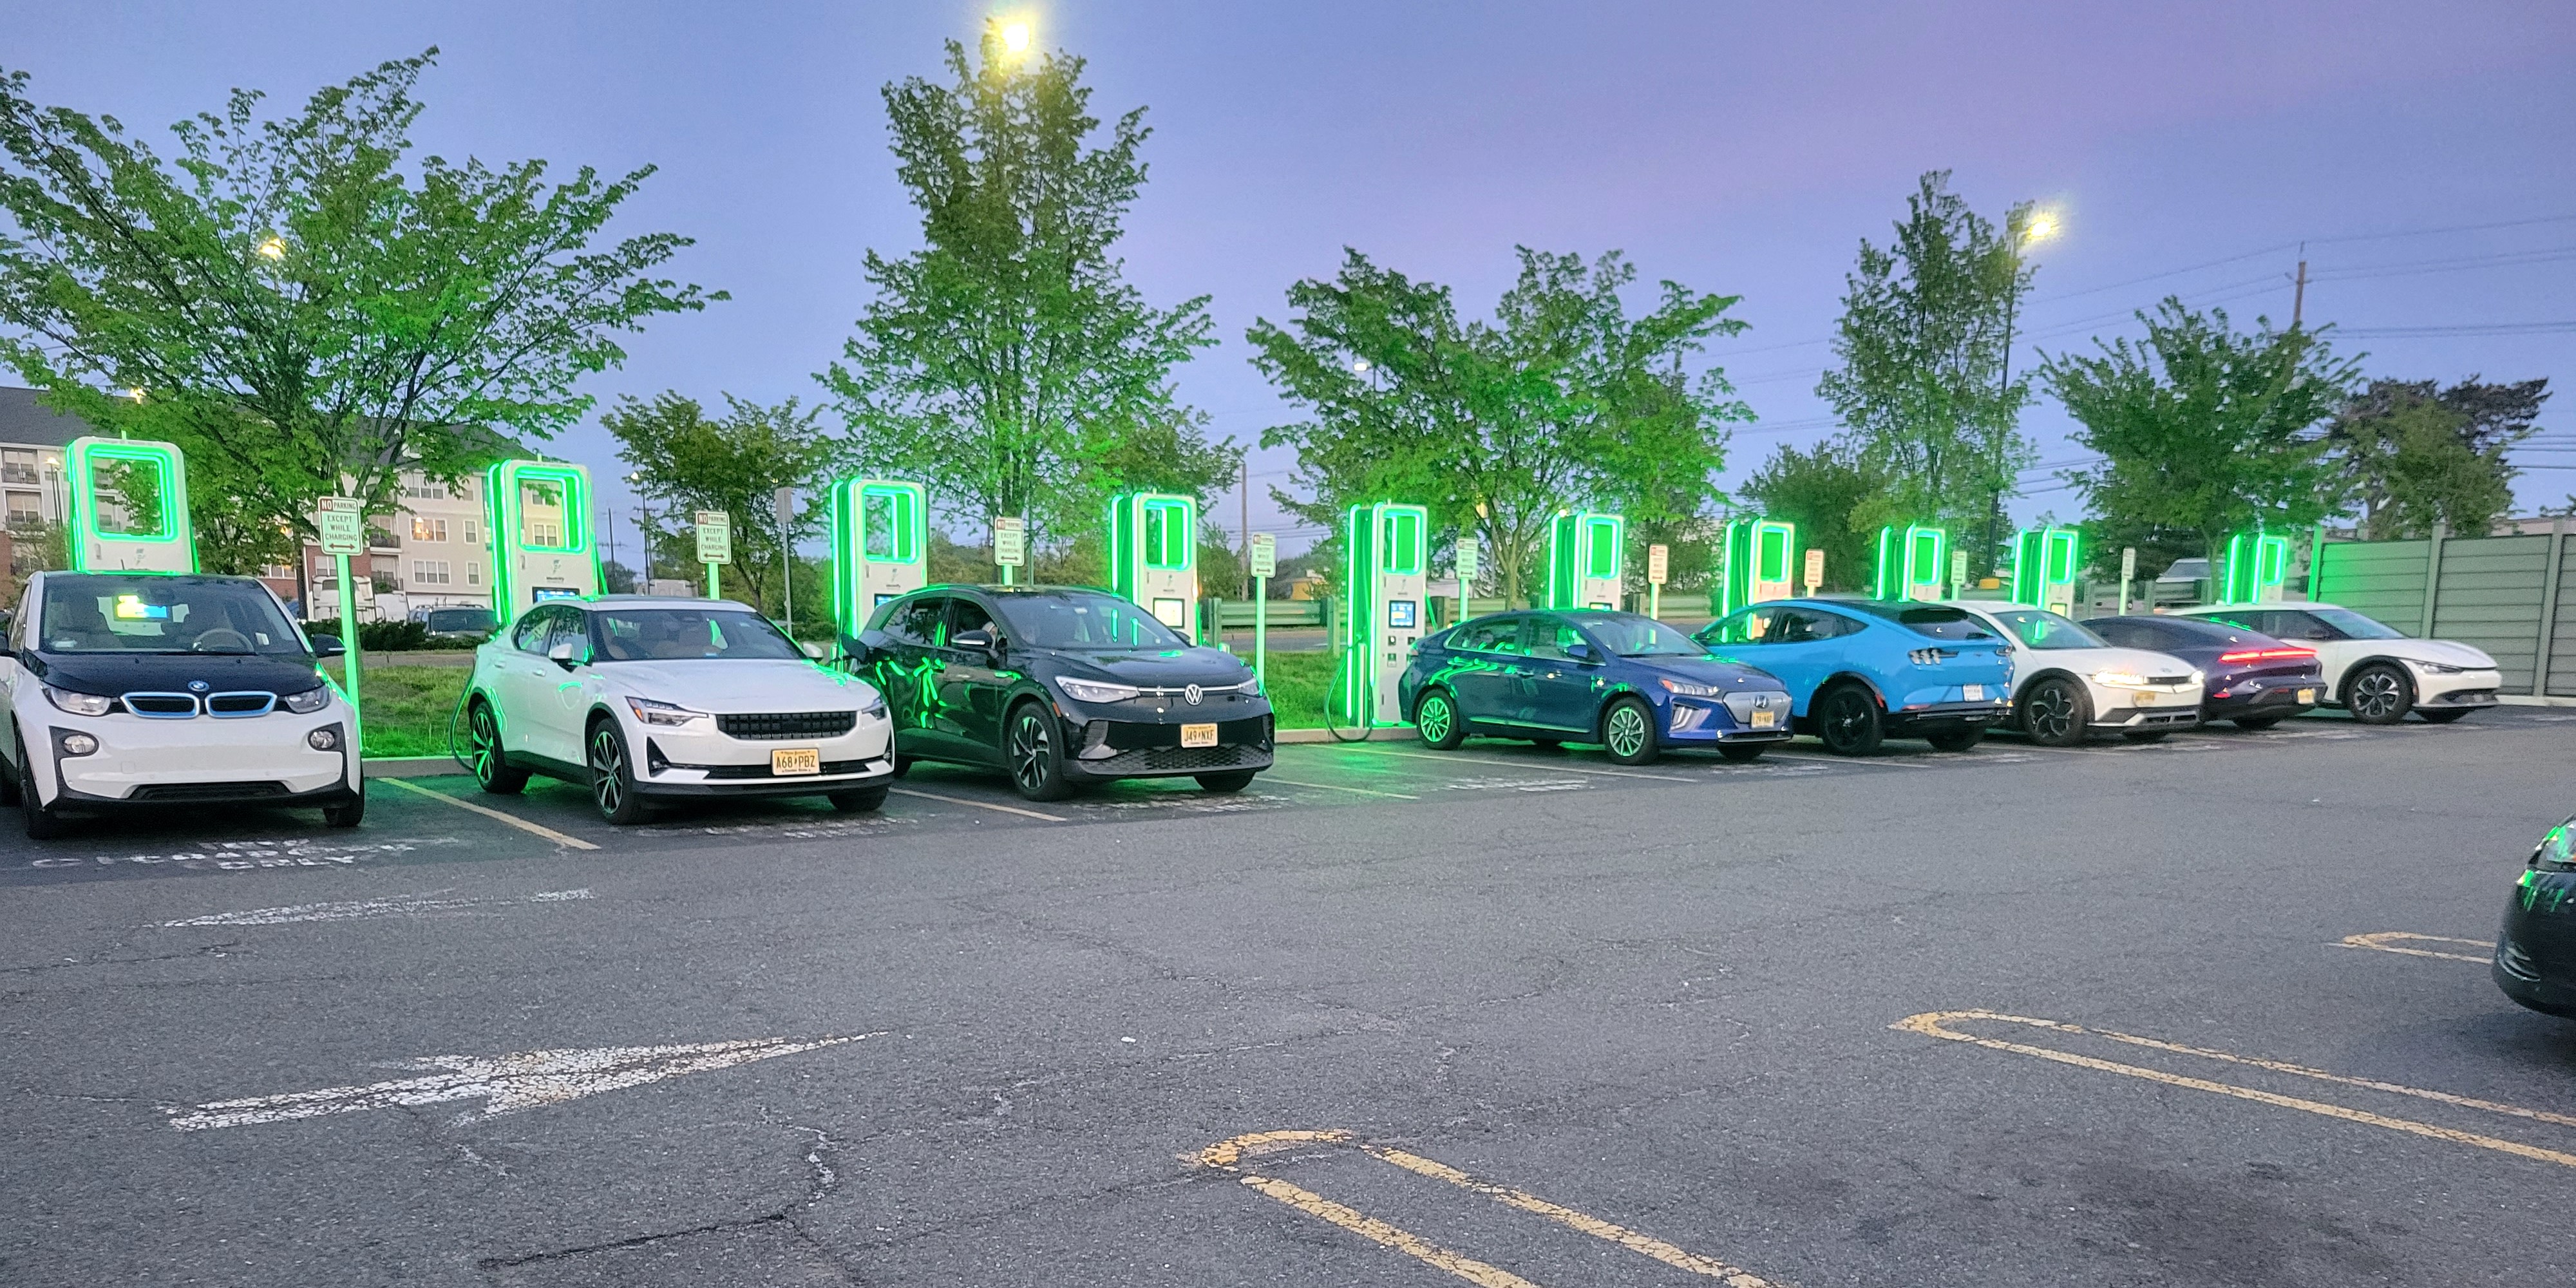 This is what EV charging stations should look like